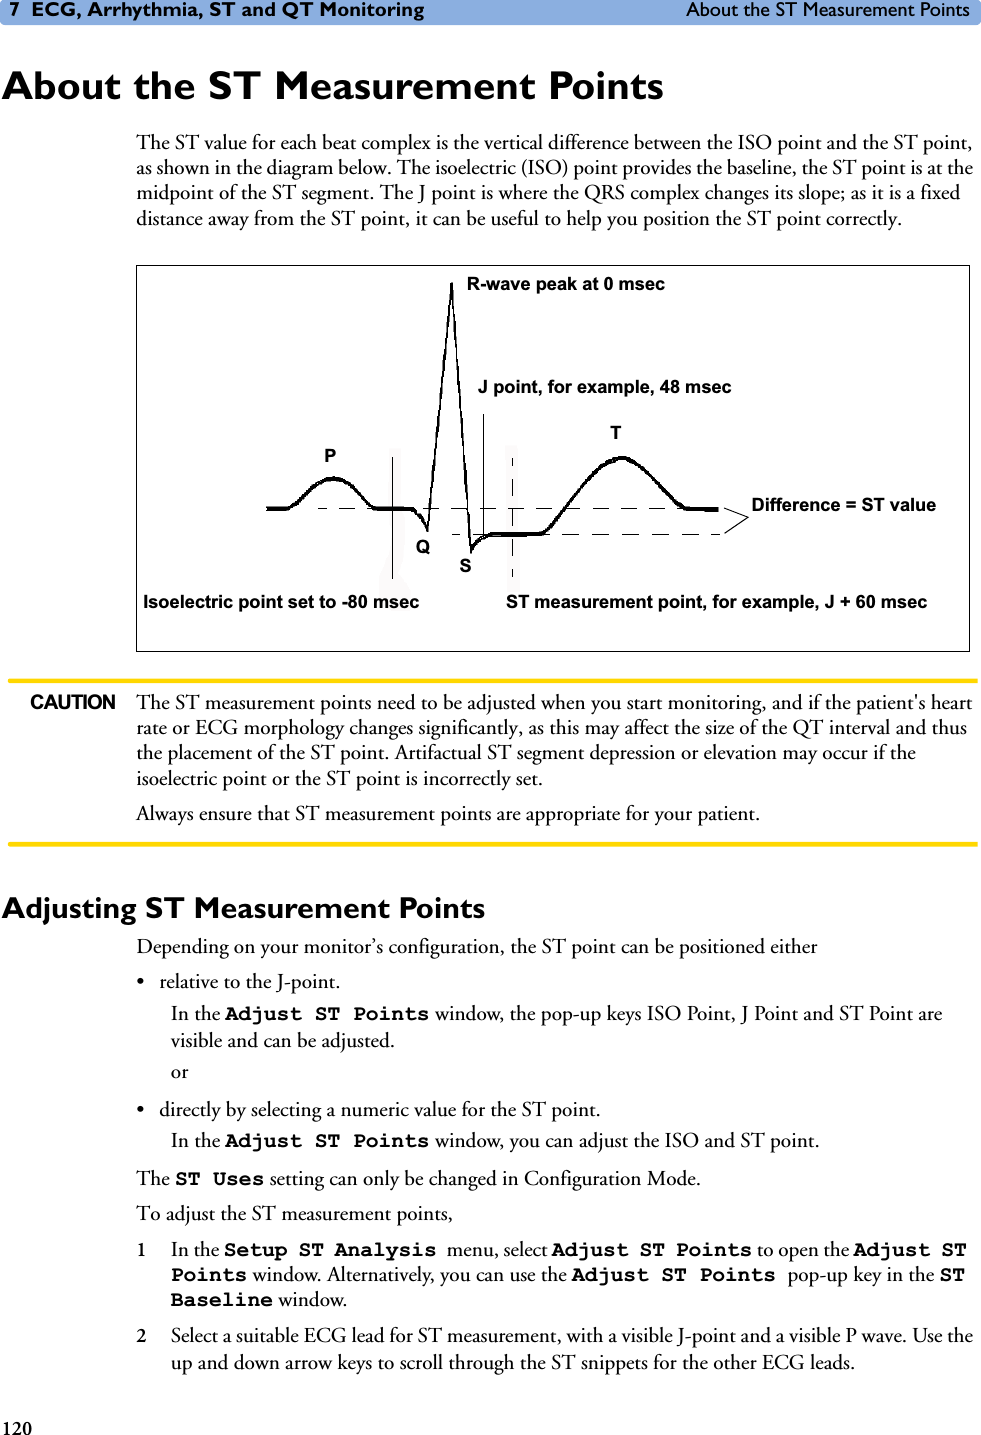 7 ECG, Arrhythmia, ST and QT Monitoring About the ST Measurement Points120About the ST Measurement PointsThe ST value for each beat complex is the vertical difference between the ISO point and the ST point, as shown in the diagram below. The isoelectric (ISO) point provides the baseline, the ST point is at the midpoint of the ST segment. The J point is where the QRS complex changes its slope; as it is a fixed distance away from the ST point, it can be useful to help you position the ST point correctly. CAUTION The ST measurement points need to be adjusted when you start monitoring, and if the patient&apos;s heart rate or ECG morphology changes significantly, as this may affect the size of the QT interval and thus the placement of the ST point. Artifactual ST segment depression or elevation may occur if the isoelectric point or the ST point is incorrectly set. Always ensure that ST measurement points are appropriate for your patient.Adjusting ST Measurement PointsDepending on your monitor’s configuration, the ST point can be positioned either • relative to the J-point. In the Adjust ST Points window, the pop-up keys ISO Point, J Point and ST Point are visible and can be adjusted. or• directly by selecting a numeric value for the ST point. In the Adjust ST Points window, you can adjust the ISO and ST point. The ST Uses setting can only be changed in Configuration Mode. To adjust the ST measurement points, 1In the Setup ST Analysis menu, select Adjust ST Points to open the Adjust ST Points window. Alternatively, you can use the Adjust ST Points pop-up key in the ST Baseline window.2Select a suitable ECG lead for ST measurement, with a visible J-point and a visible P wave. Use the up and down arrow keys to scroll through the ST snippets for the other ECG leads. J point, for example, 48 msecR-wave peak at 0 msecIsoelectric point set to -80 msecDifference = ST valueST measurement point, for example, J + 60 msecTPQS